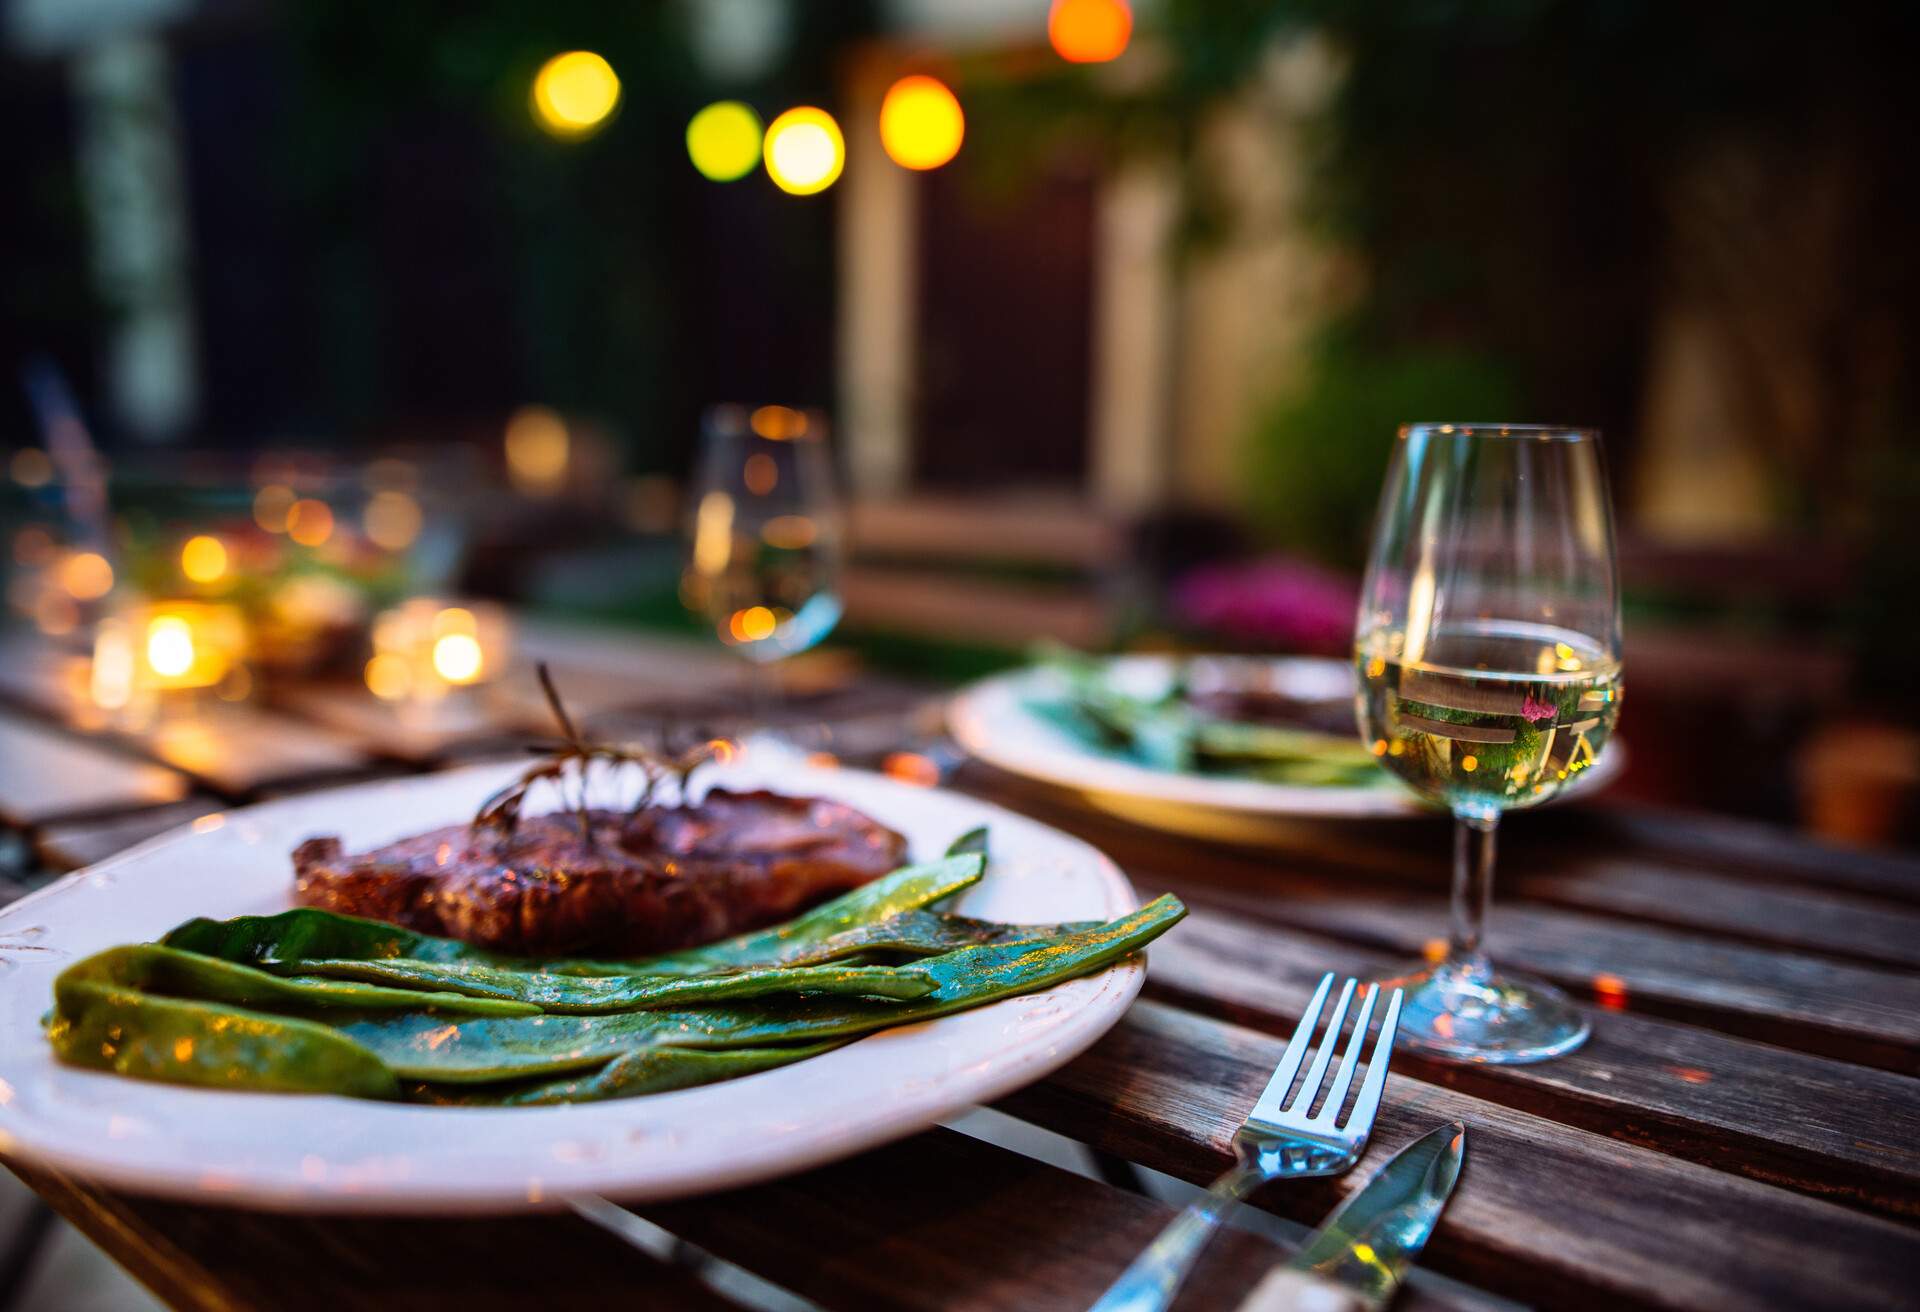 A romantic outdoor dinner for two, featuring a wooden table adorned with elegant tableware, a deliciously cooked steak on a plate, and wine glasses, accompanied by a set of silverware, is ready for a delightful dining experience.